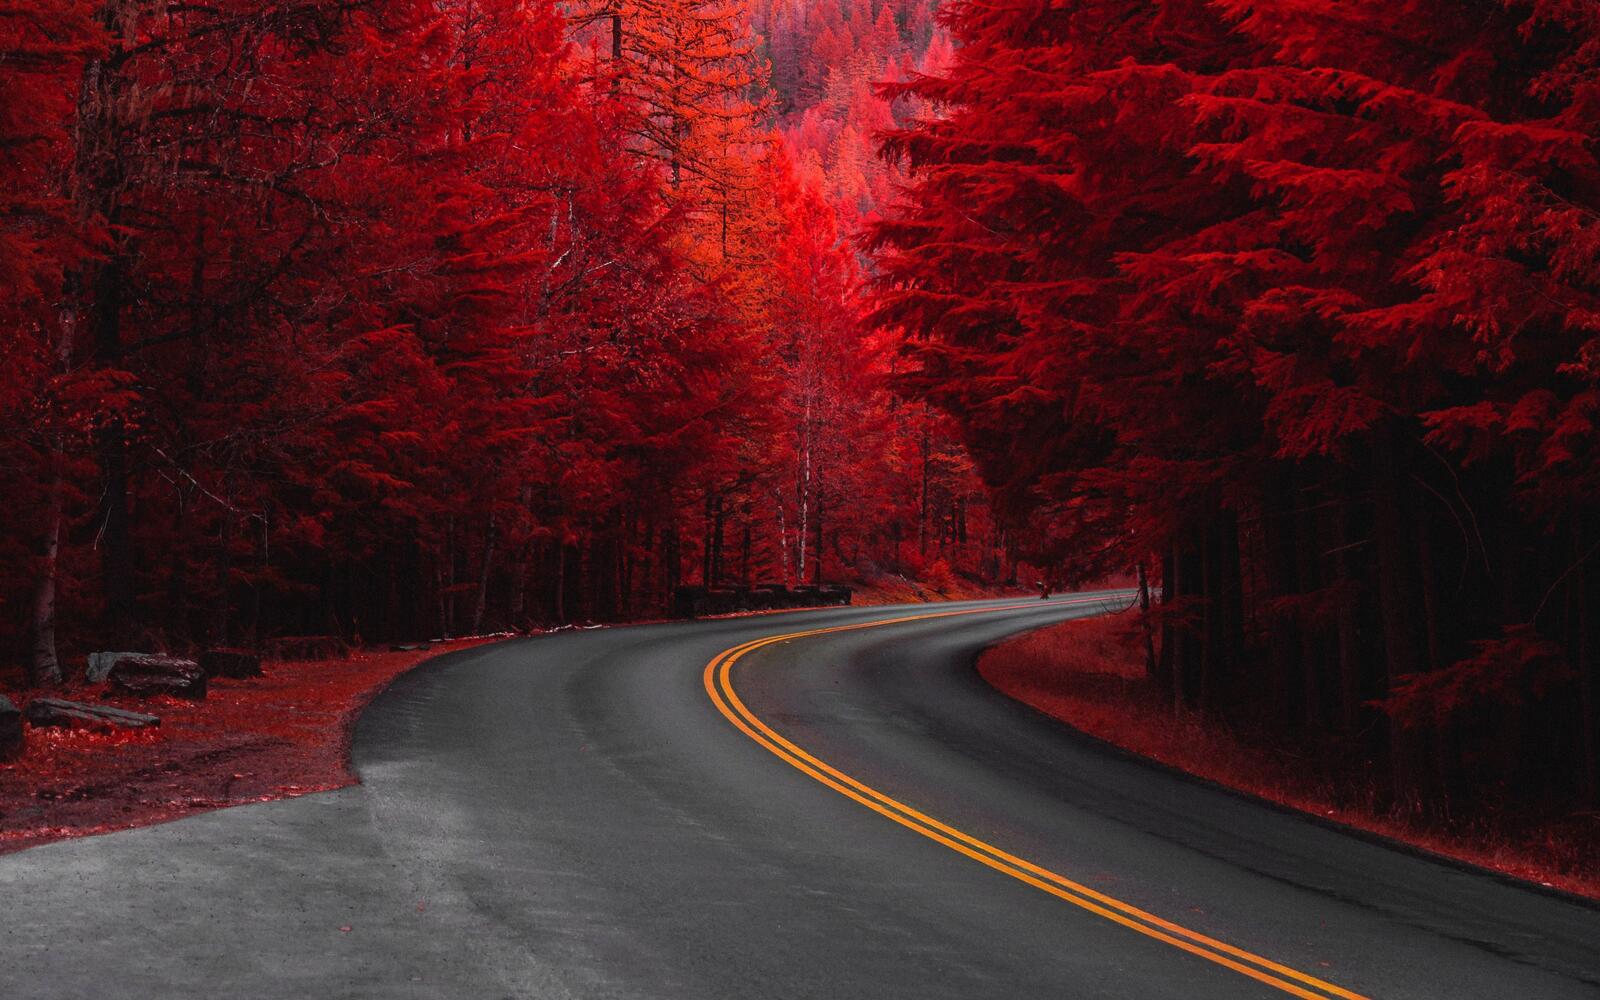 A country road through an autumn forest with red leaves